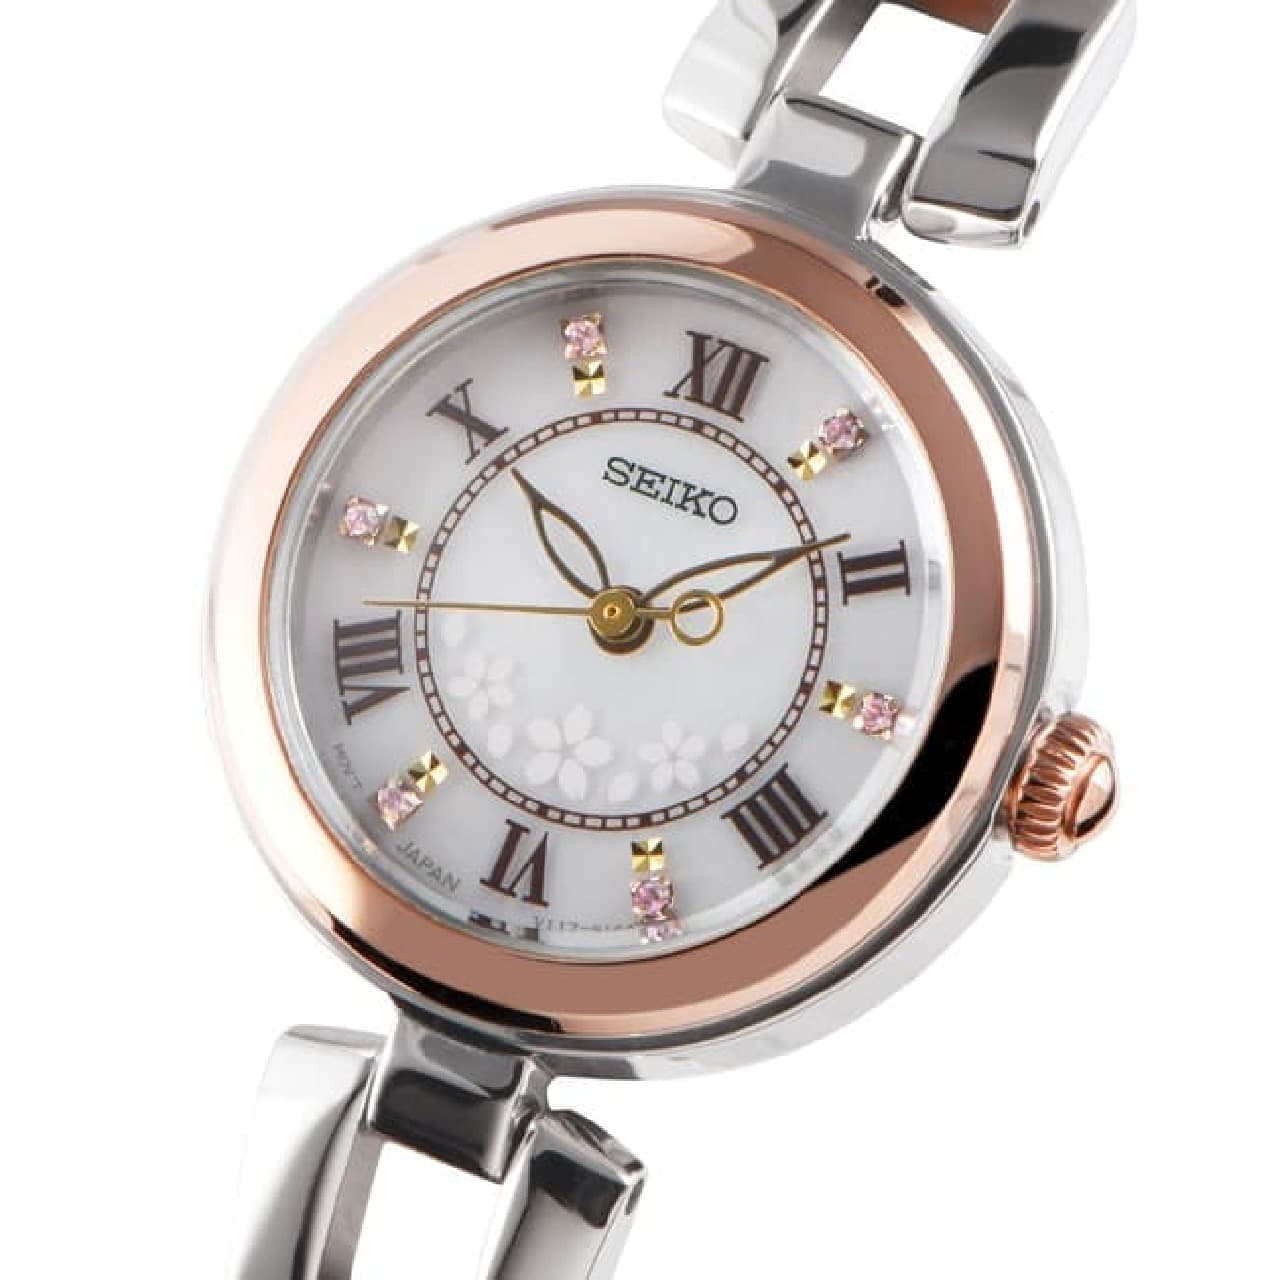 "2022 SAKURA Blooming Limited Model" From Seiko Watch --Watch with cherry blossom motif that colors spring